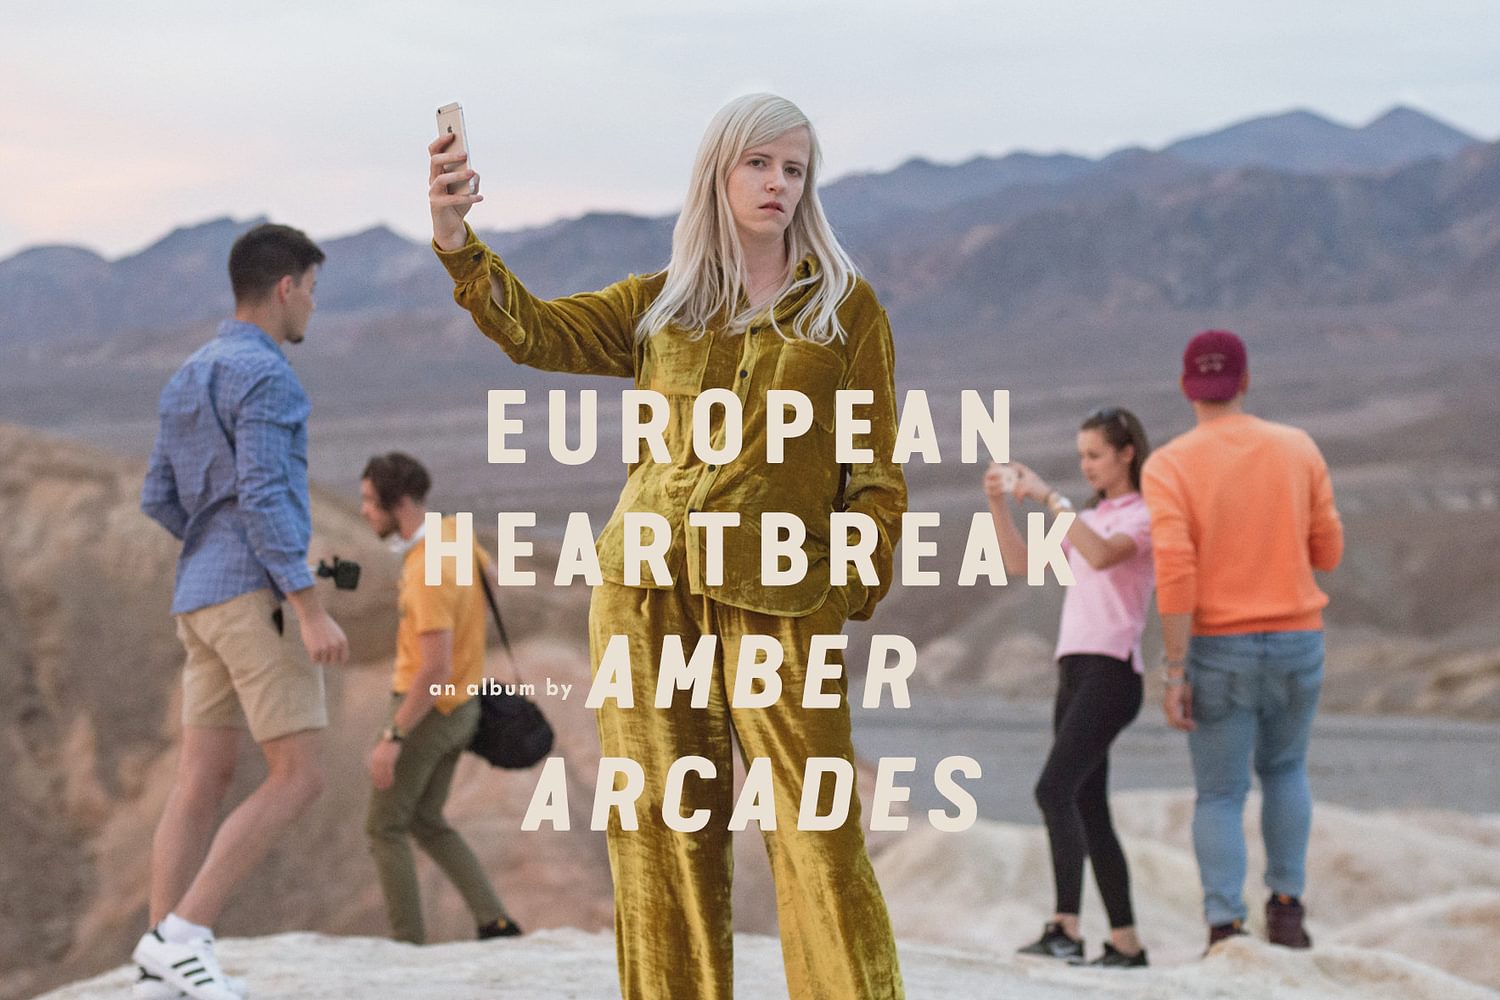 Amber Arcades: “My favourite part about playing live is the adrenaline kick”